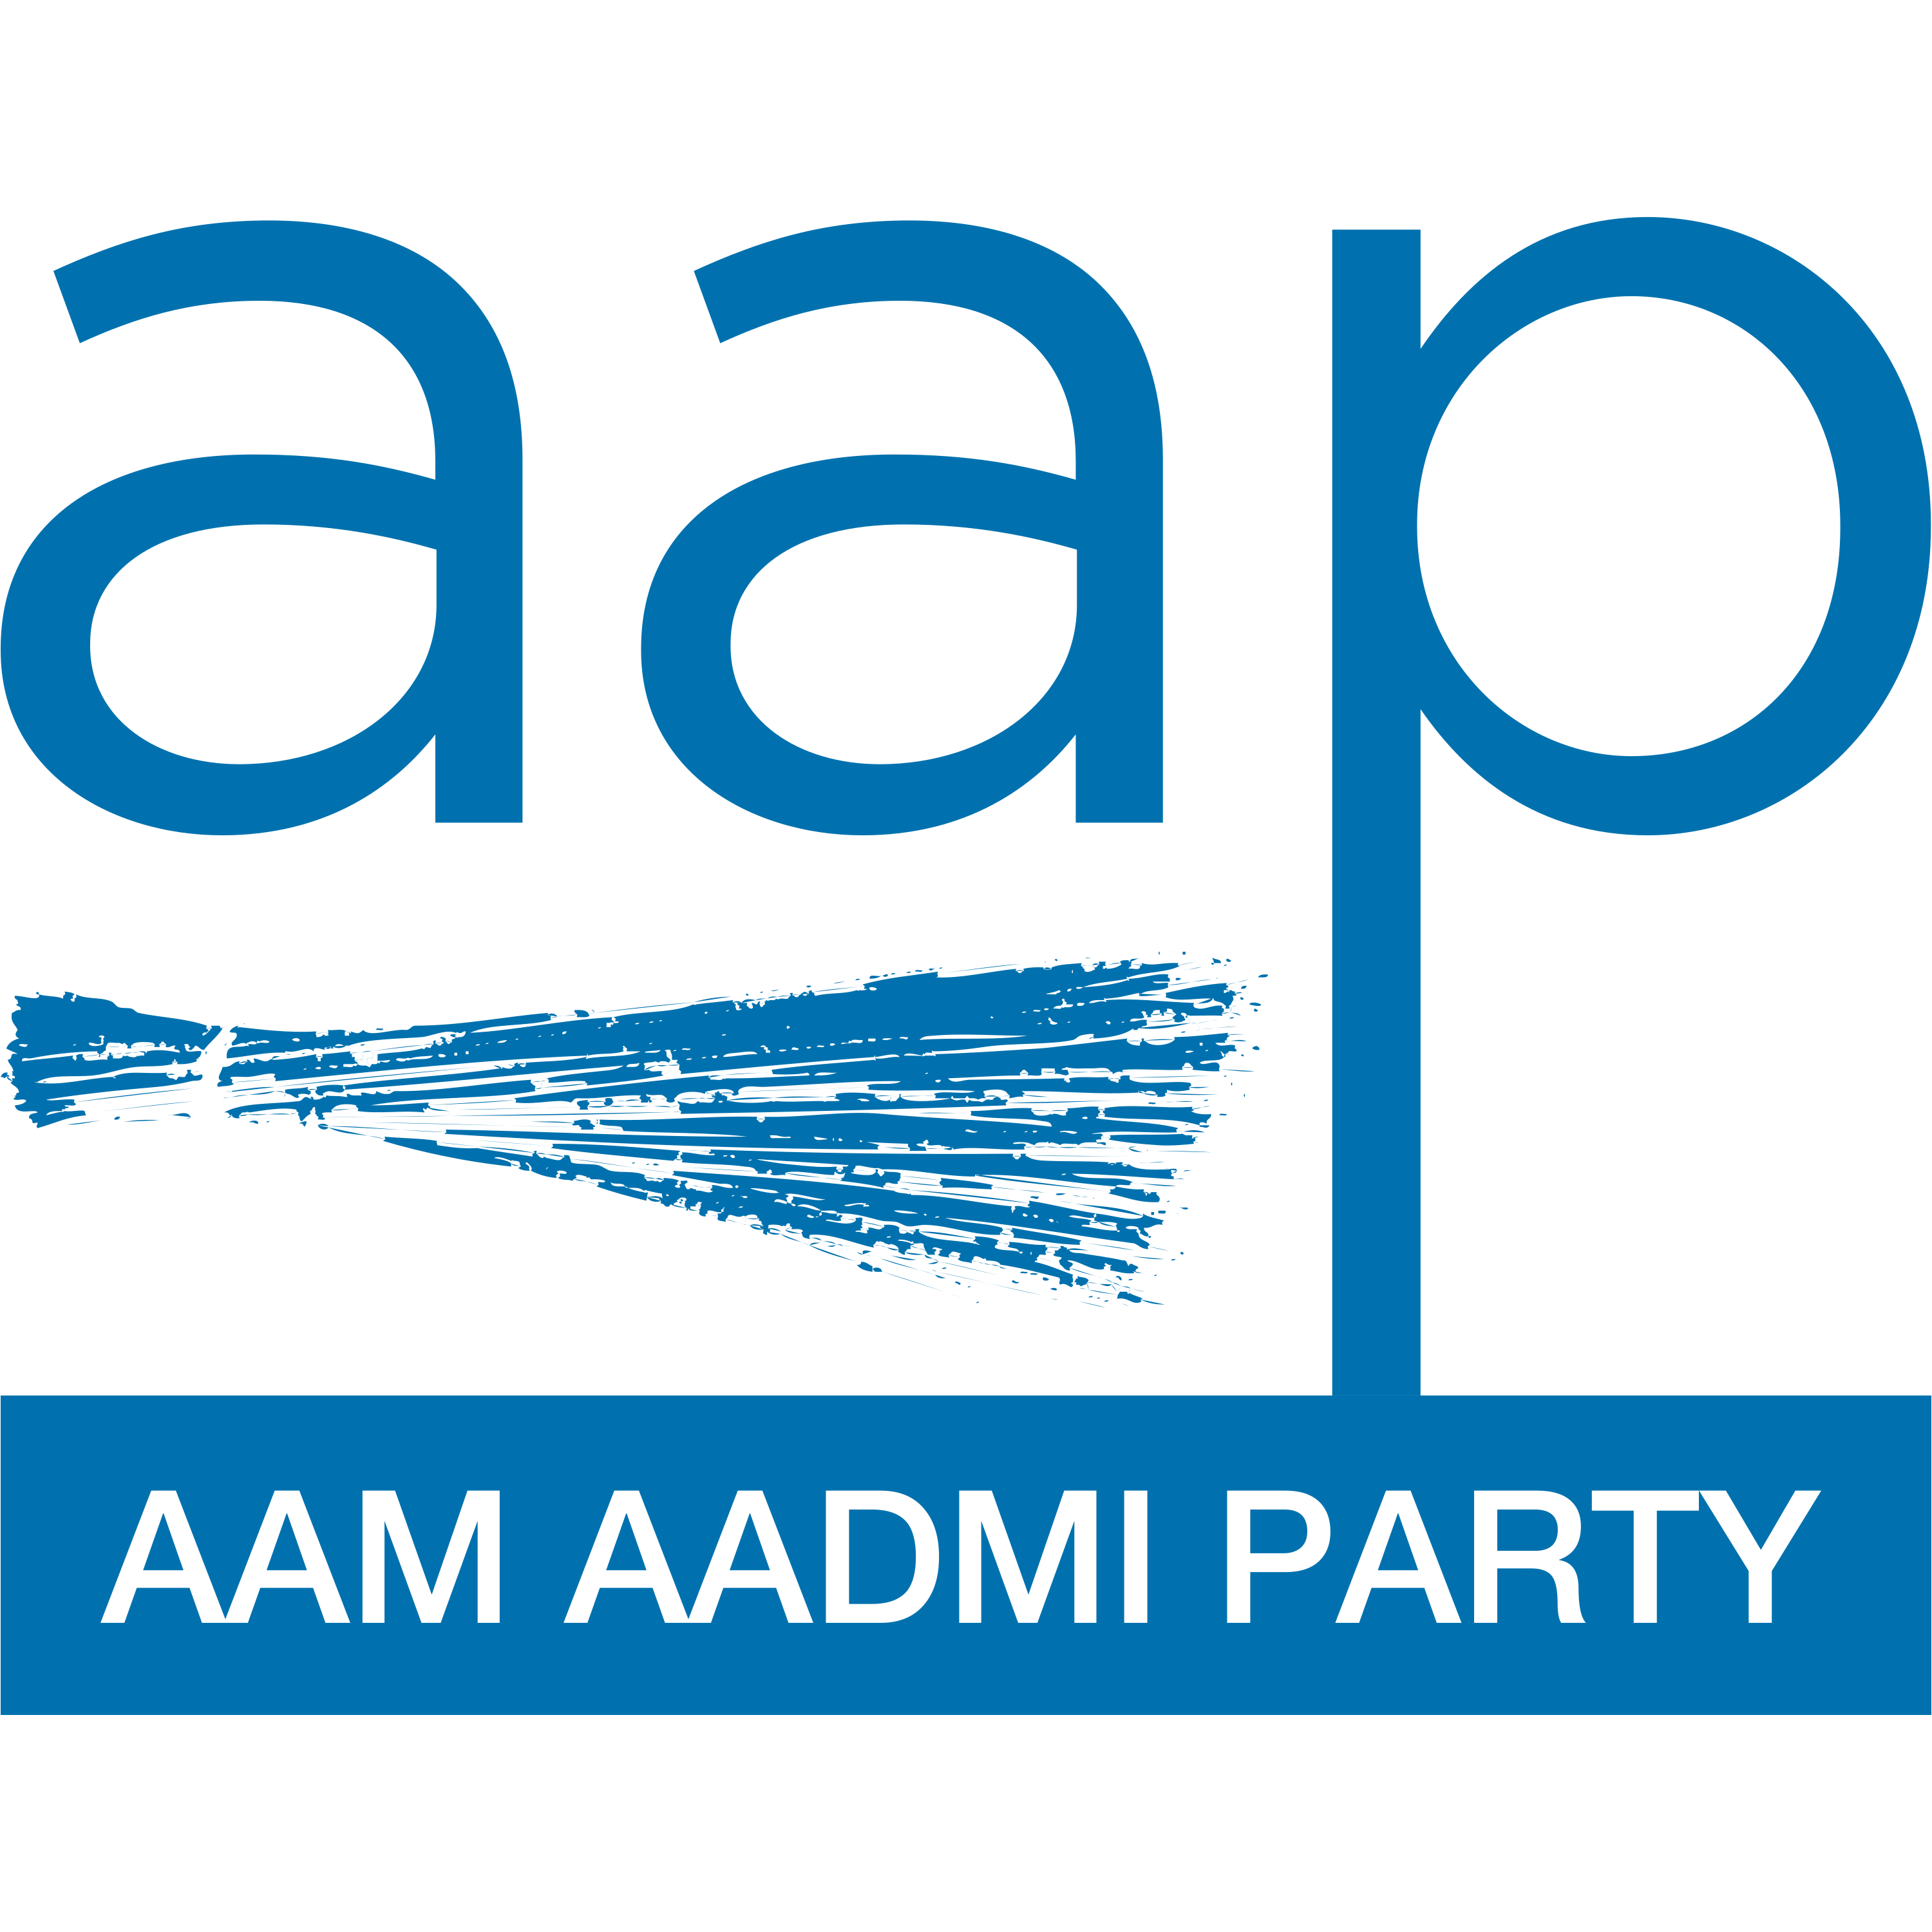 Aam Aadmi Party Logo Transparent Image